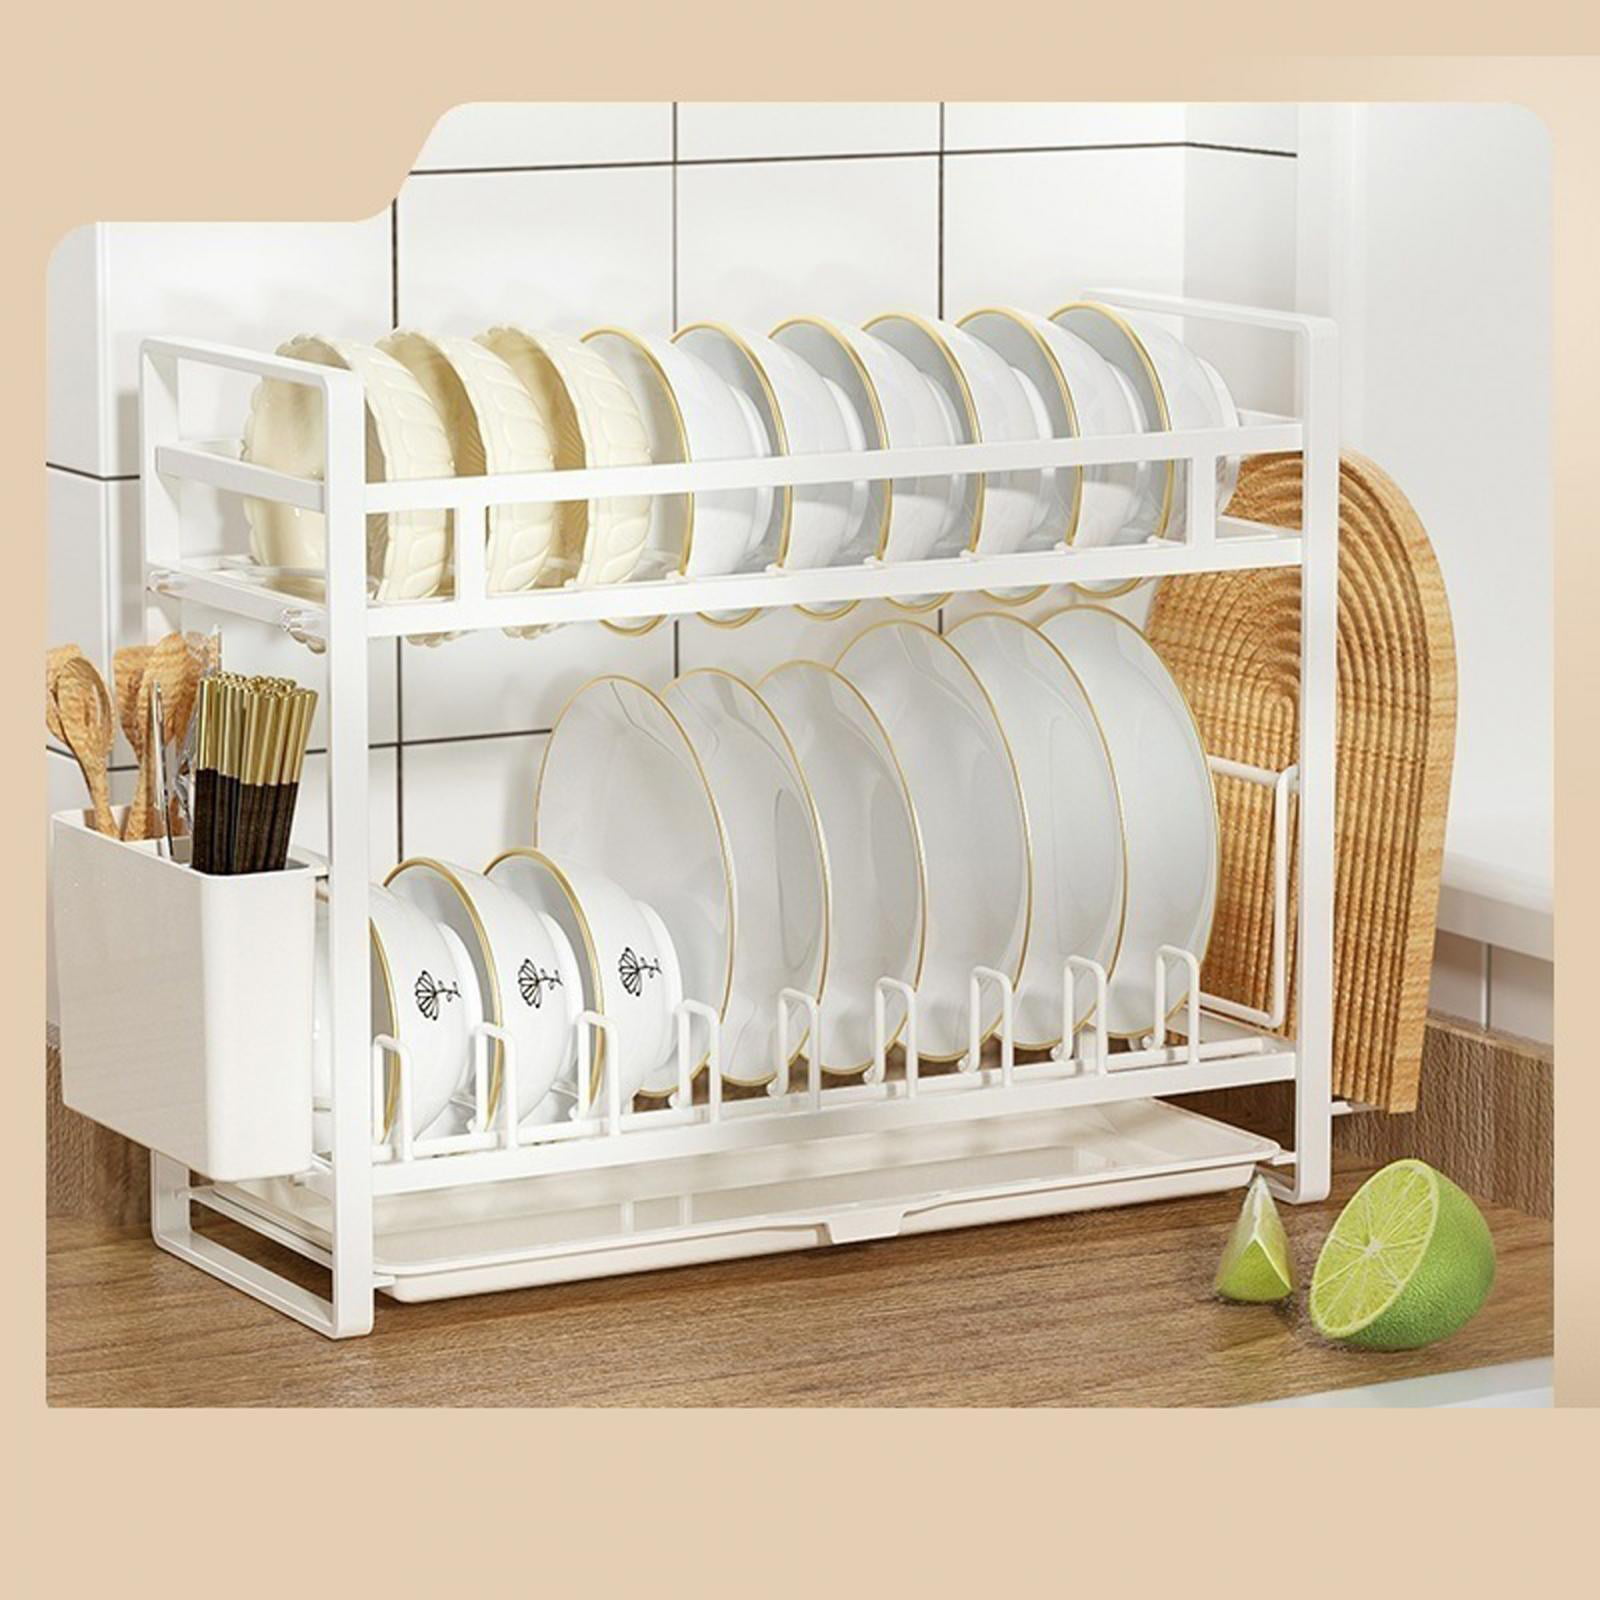 1pc Double-layered White Pp & Stainless Steel Kitchen Bowl Rack,  Multi-functional Home Dish Rack Draining Shelf For Sink Storage